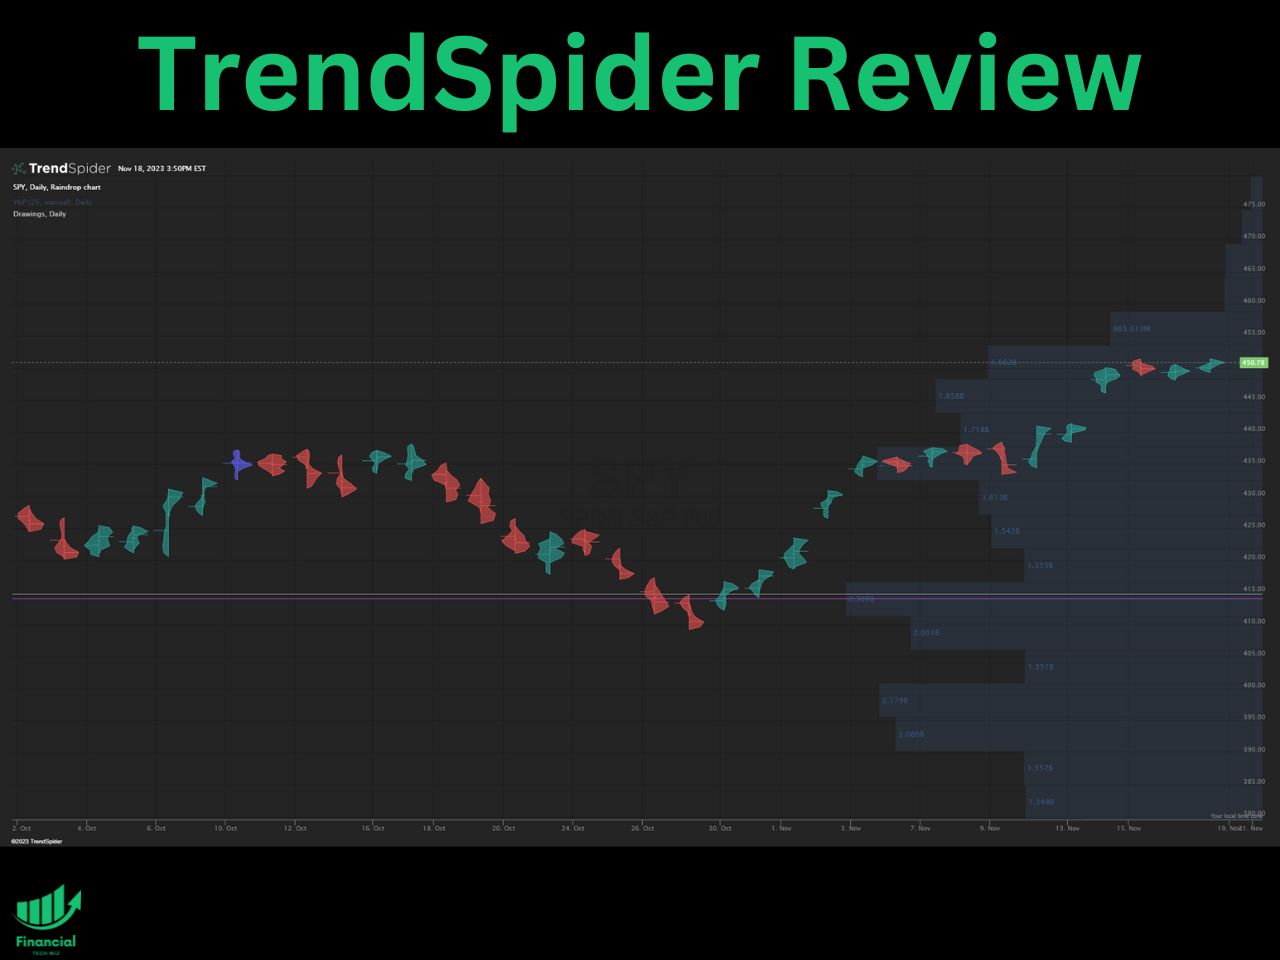 trendspider review image